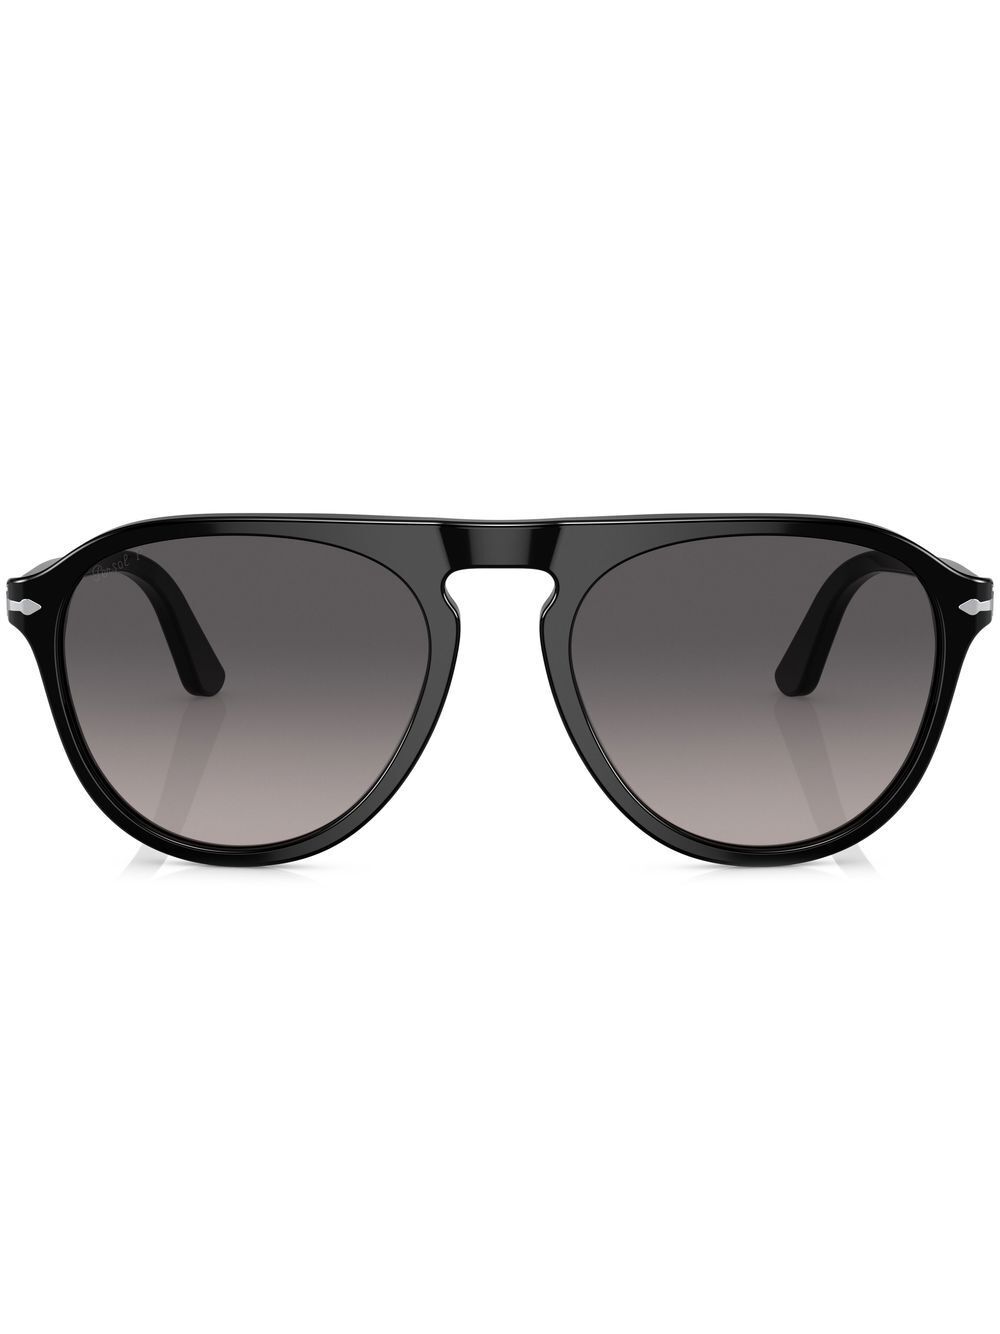 Persol round-frame tinted sunglasses - Black